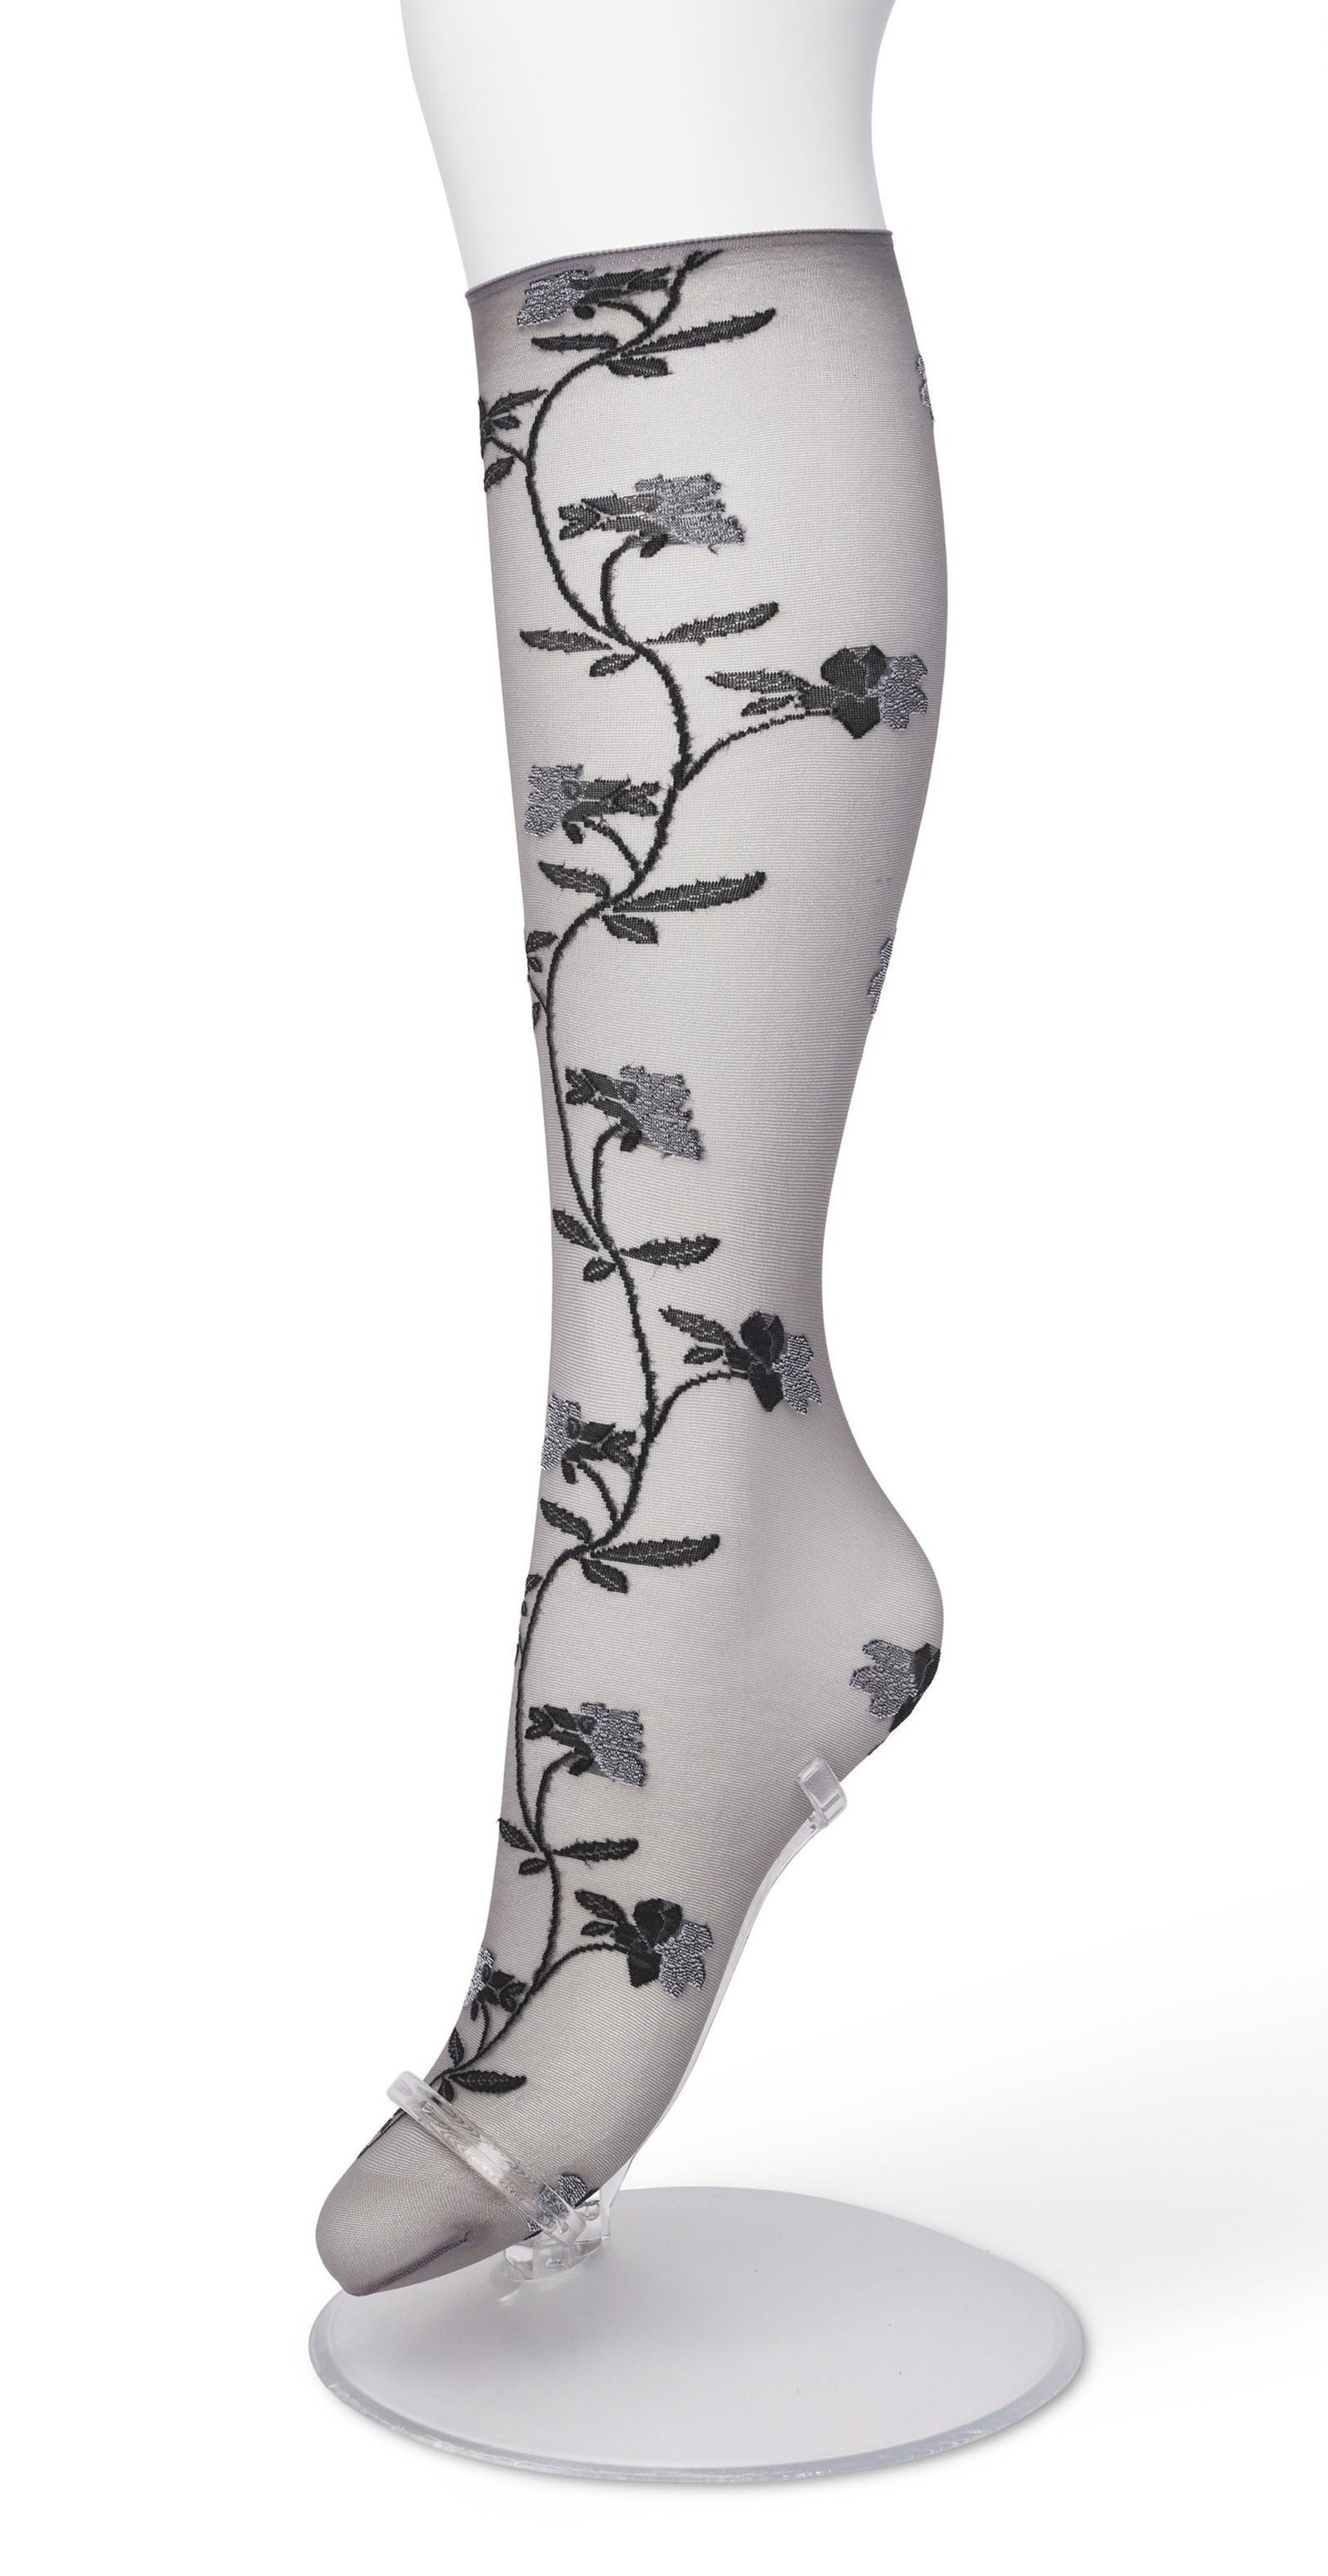 Bonnie Doon BP211510 Misty Flower Knee-high Castlerock - Sheer grey fashion knee-high socks with a woven floral vine style pattern in black and white and deep black comfort cuff with a scalloped edge.